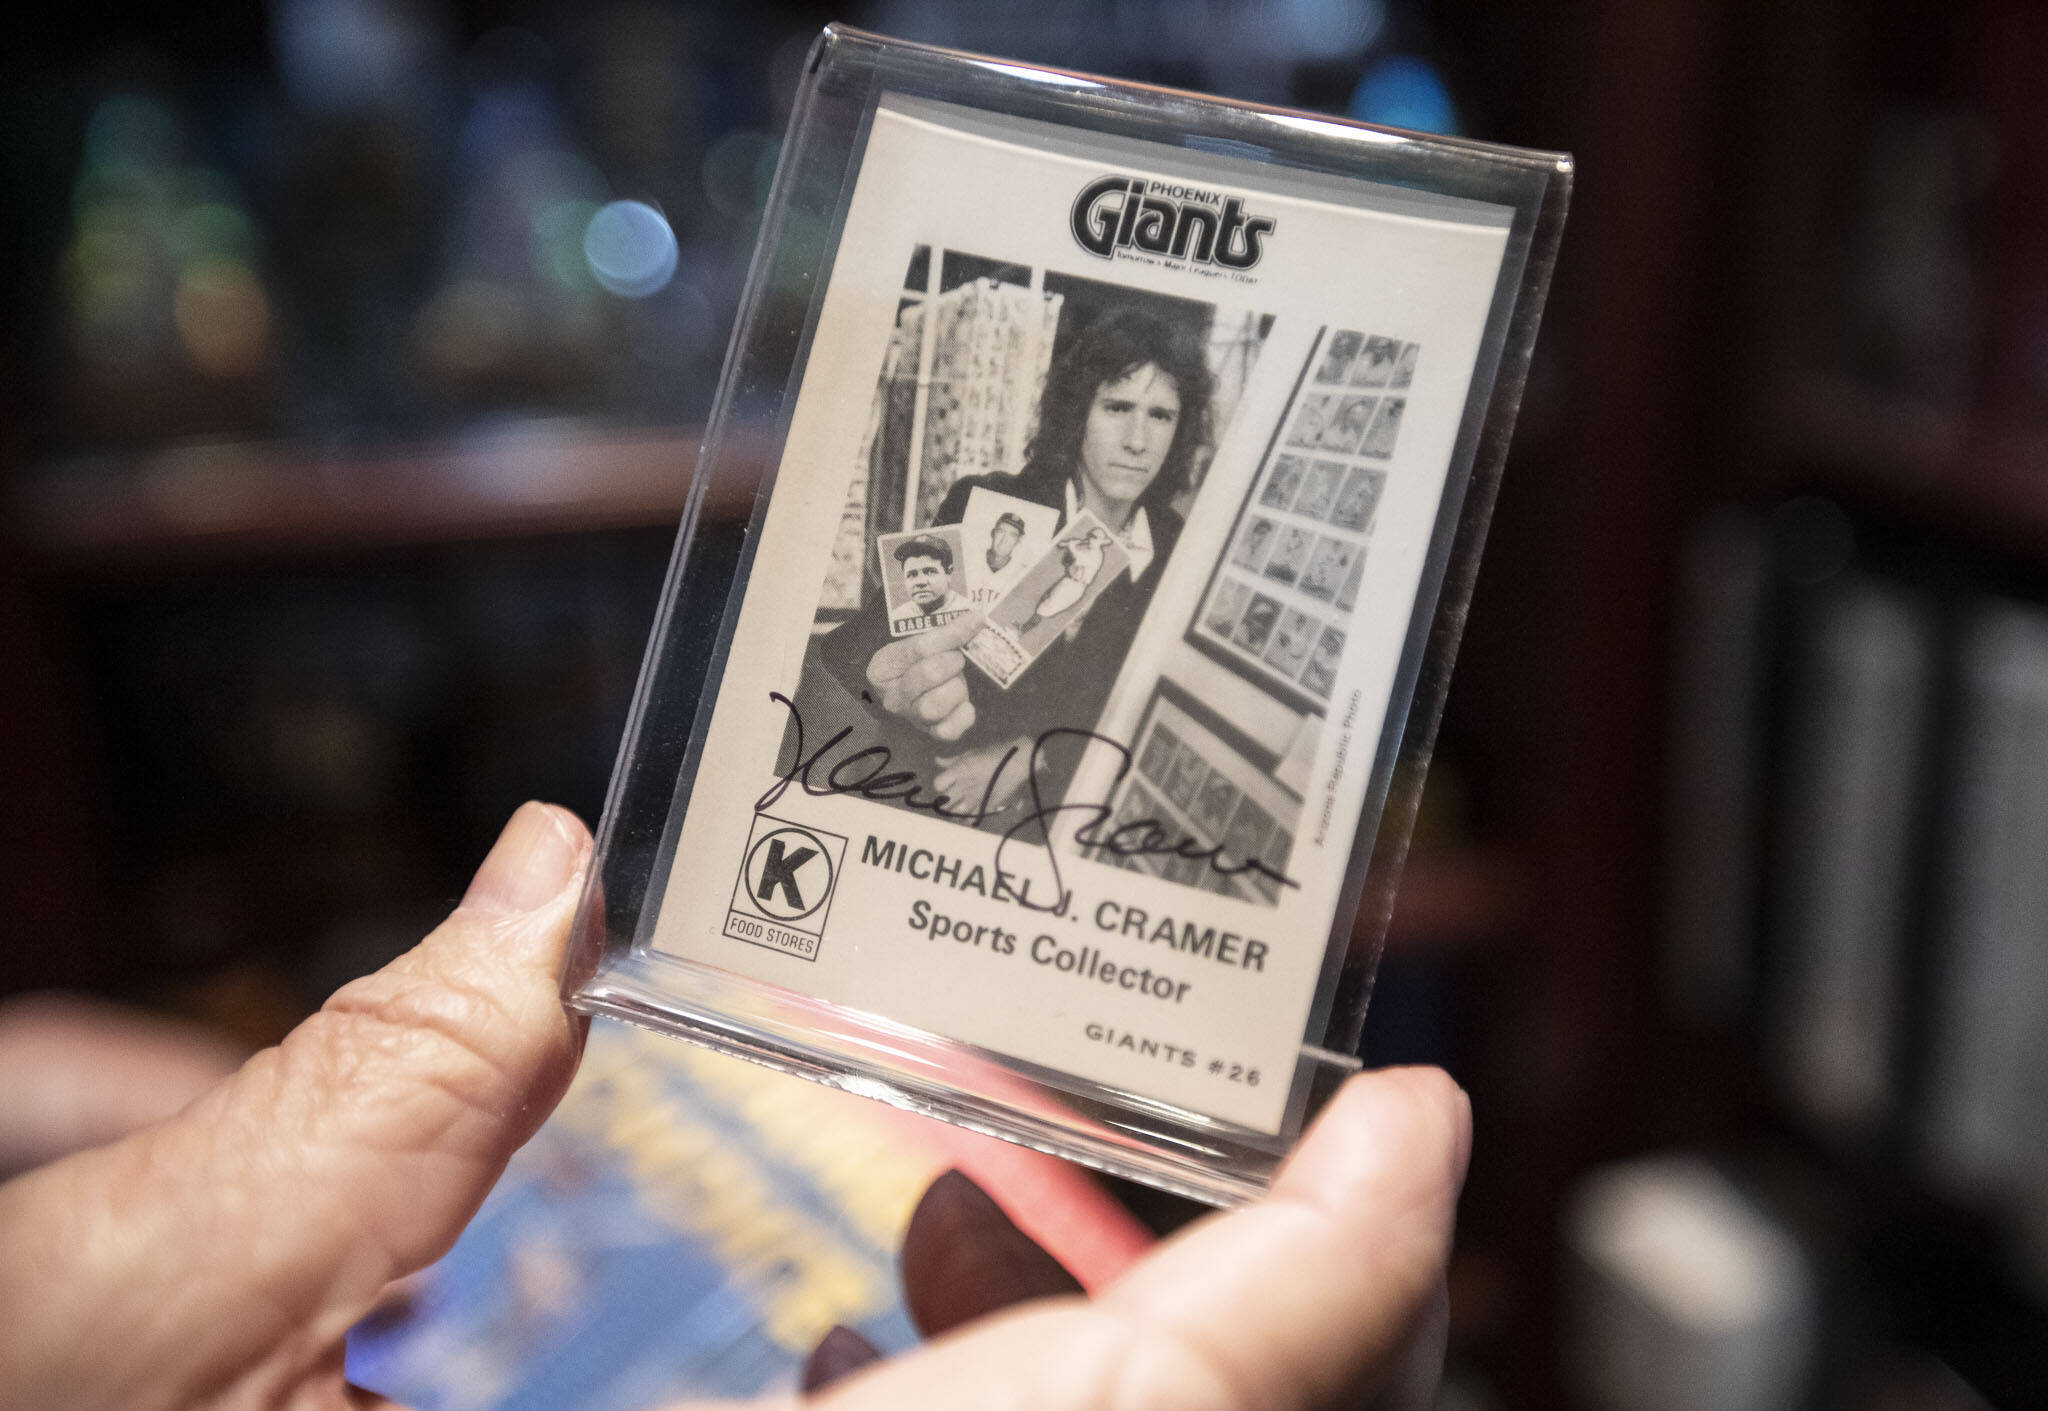 A trading card made of Mike Cramer for the Phoenix Giants. (Olivia Vanni / The Herald)